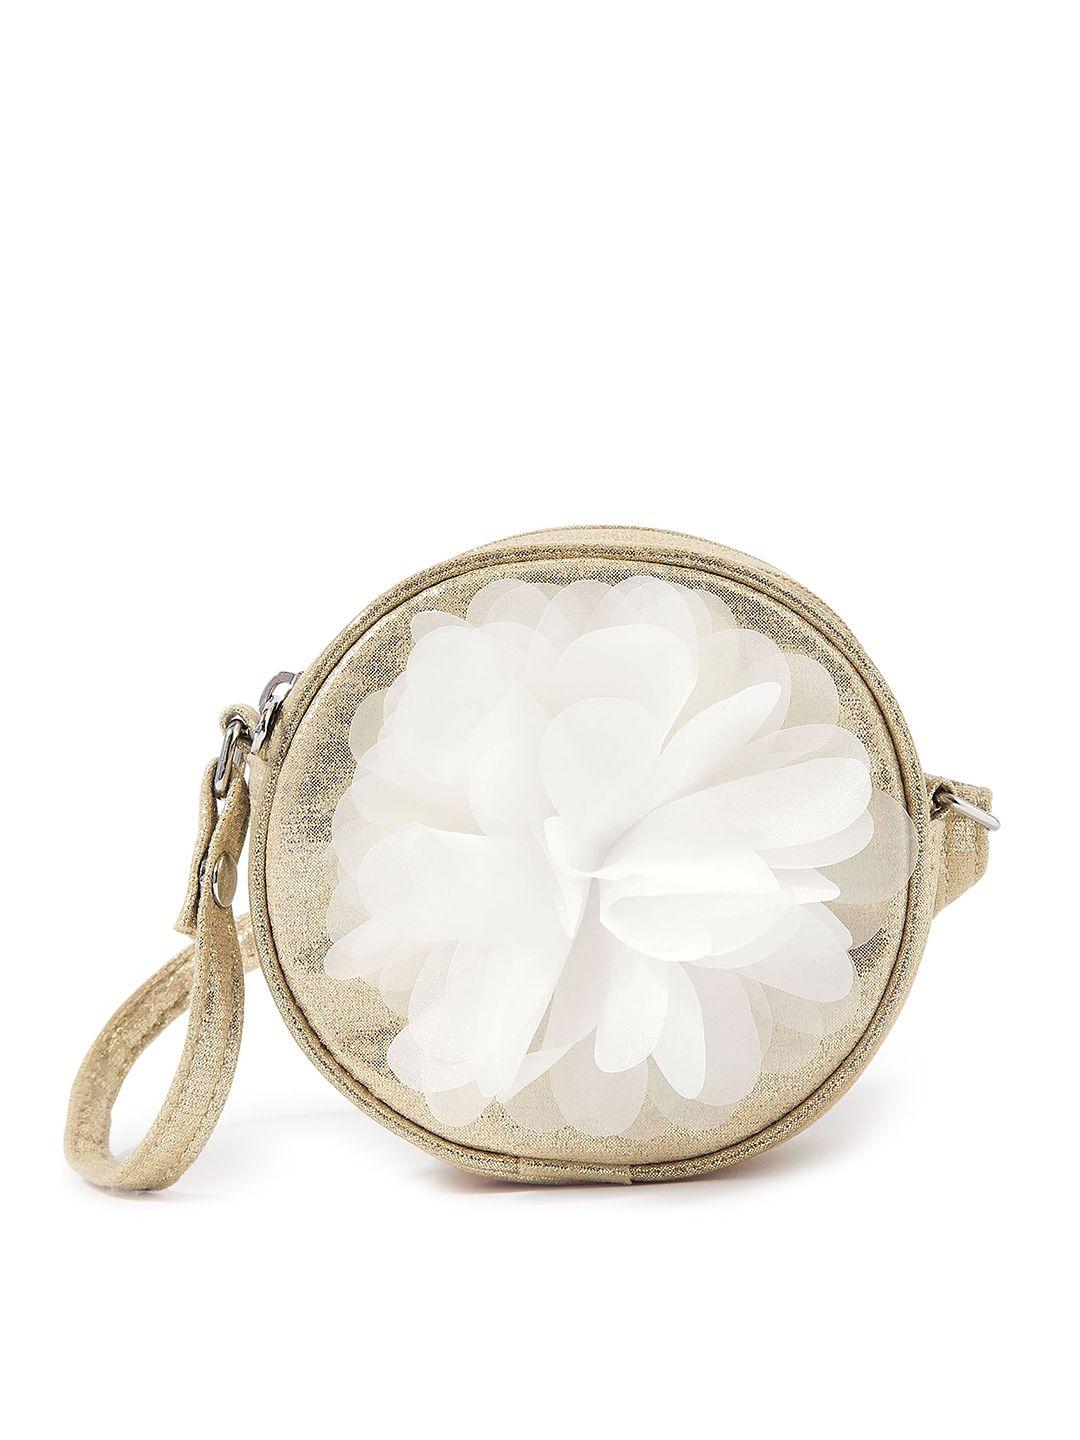 Accessorize London Girls Corsage Round Sling Bag